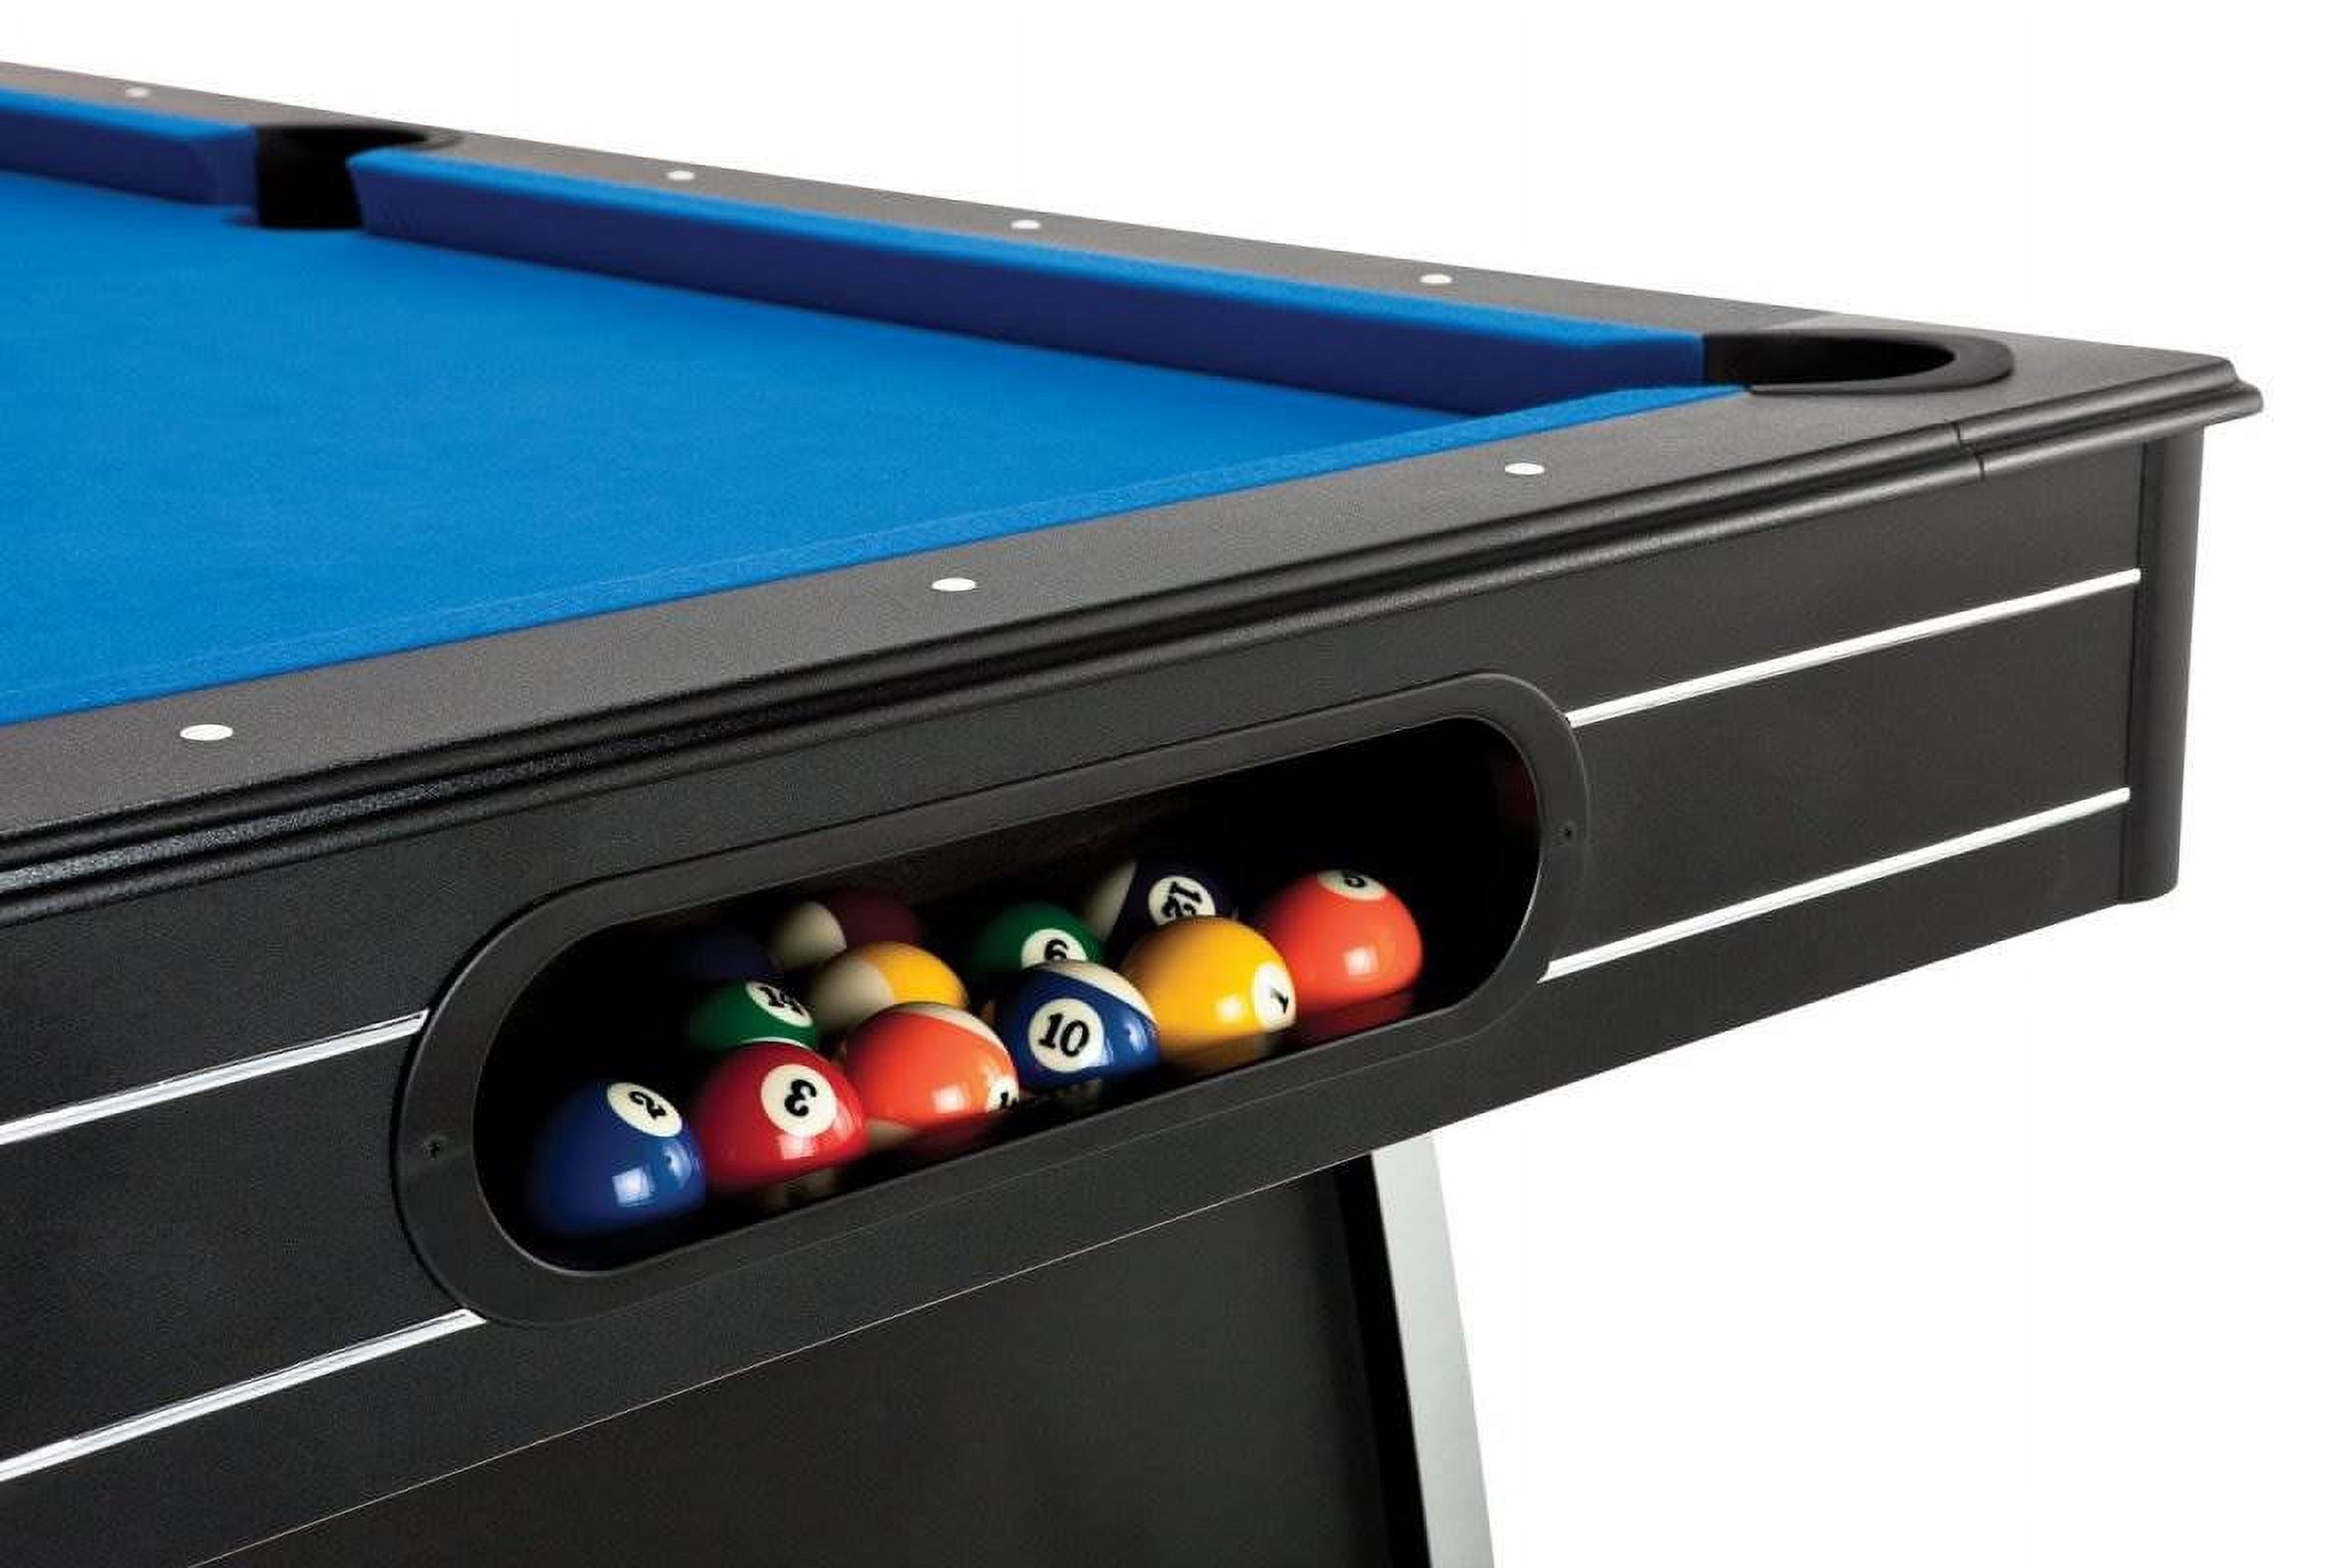 FAT CAT 7' ft Tucson Billiards/Pool Table & Accessories | 64-0146 - image 2 of 2